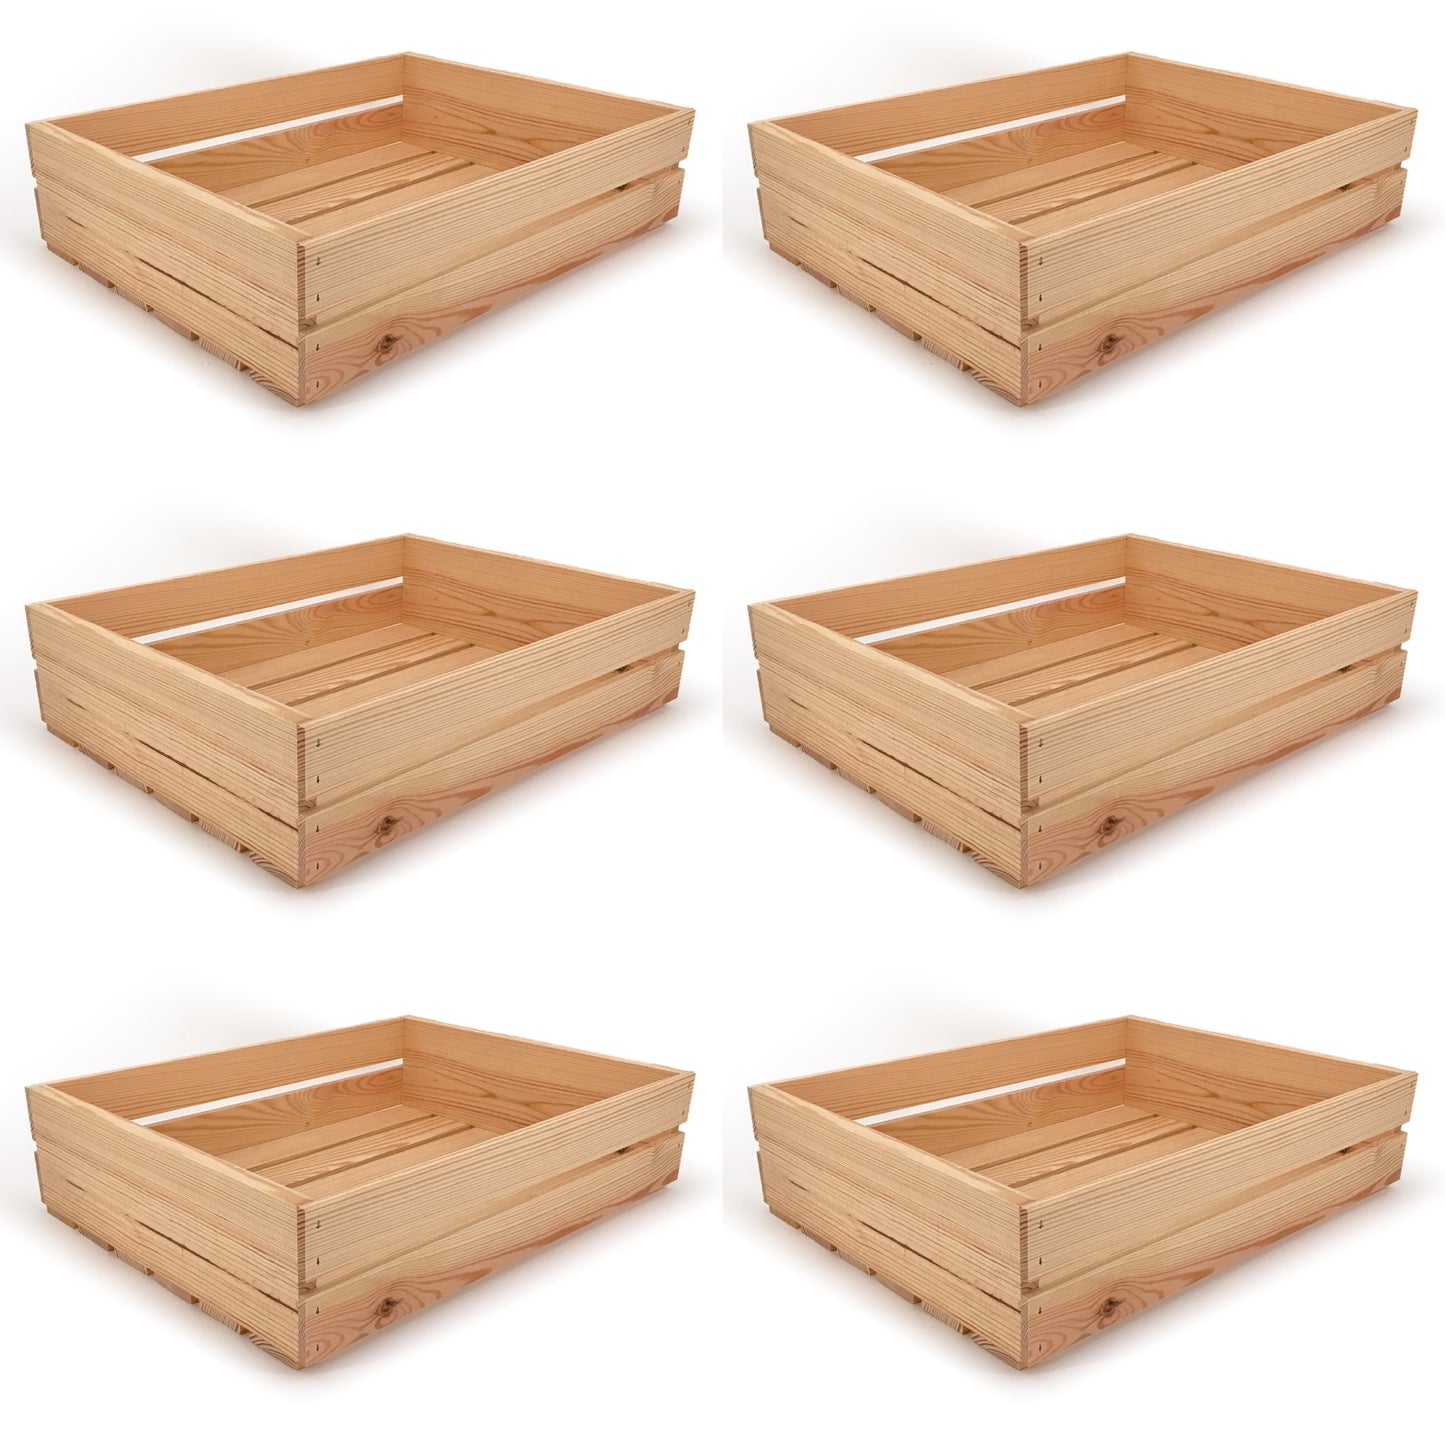 6 Small wooden crates 22x17x5.25, 6-WS-22-17-5.25-NX-NW-NL, 12-WS-22-17-5.25-NX-NW-NL, 24-WS-22-17-5.25-NX-NW-NL, 48-WS-22-17-5.25-NX-NW-NL, 96-WS-22-17-5.25-NX-NW-NL